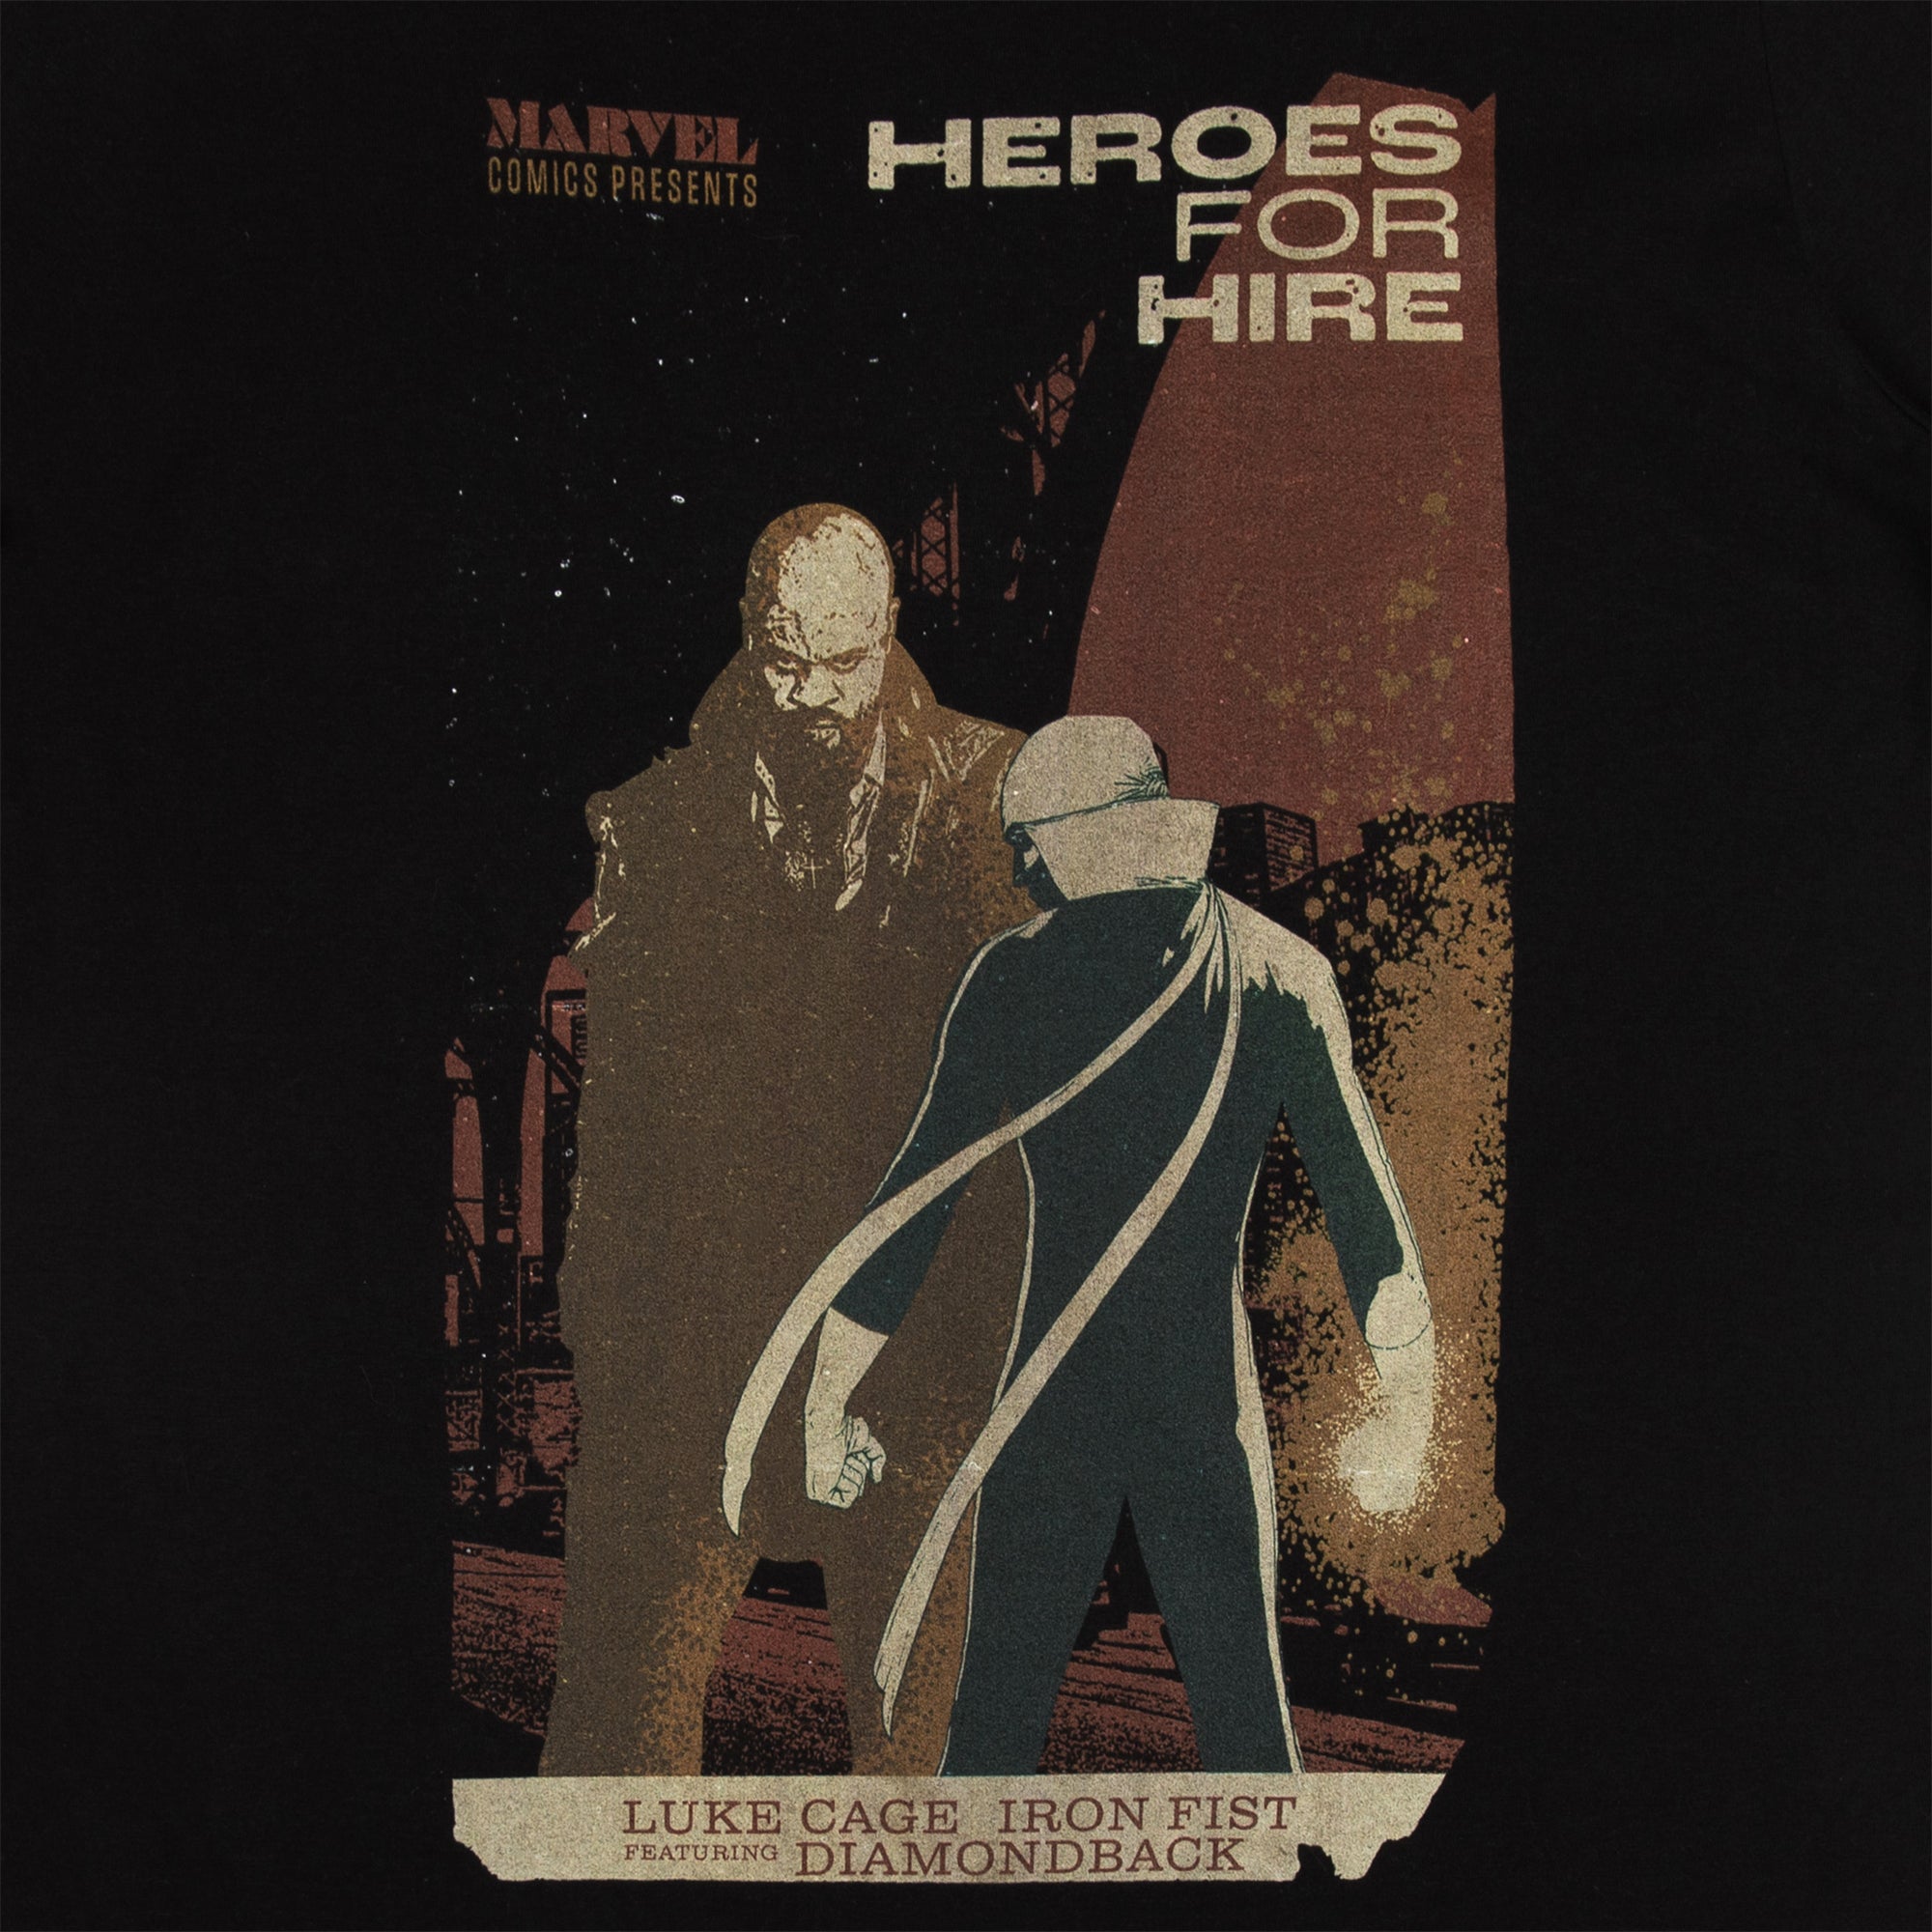 Luke Cage & Iron Fist Black Grindhouse Poster Tee